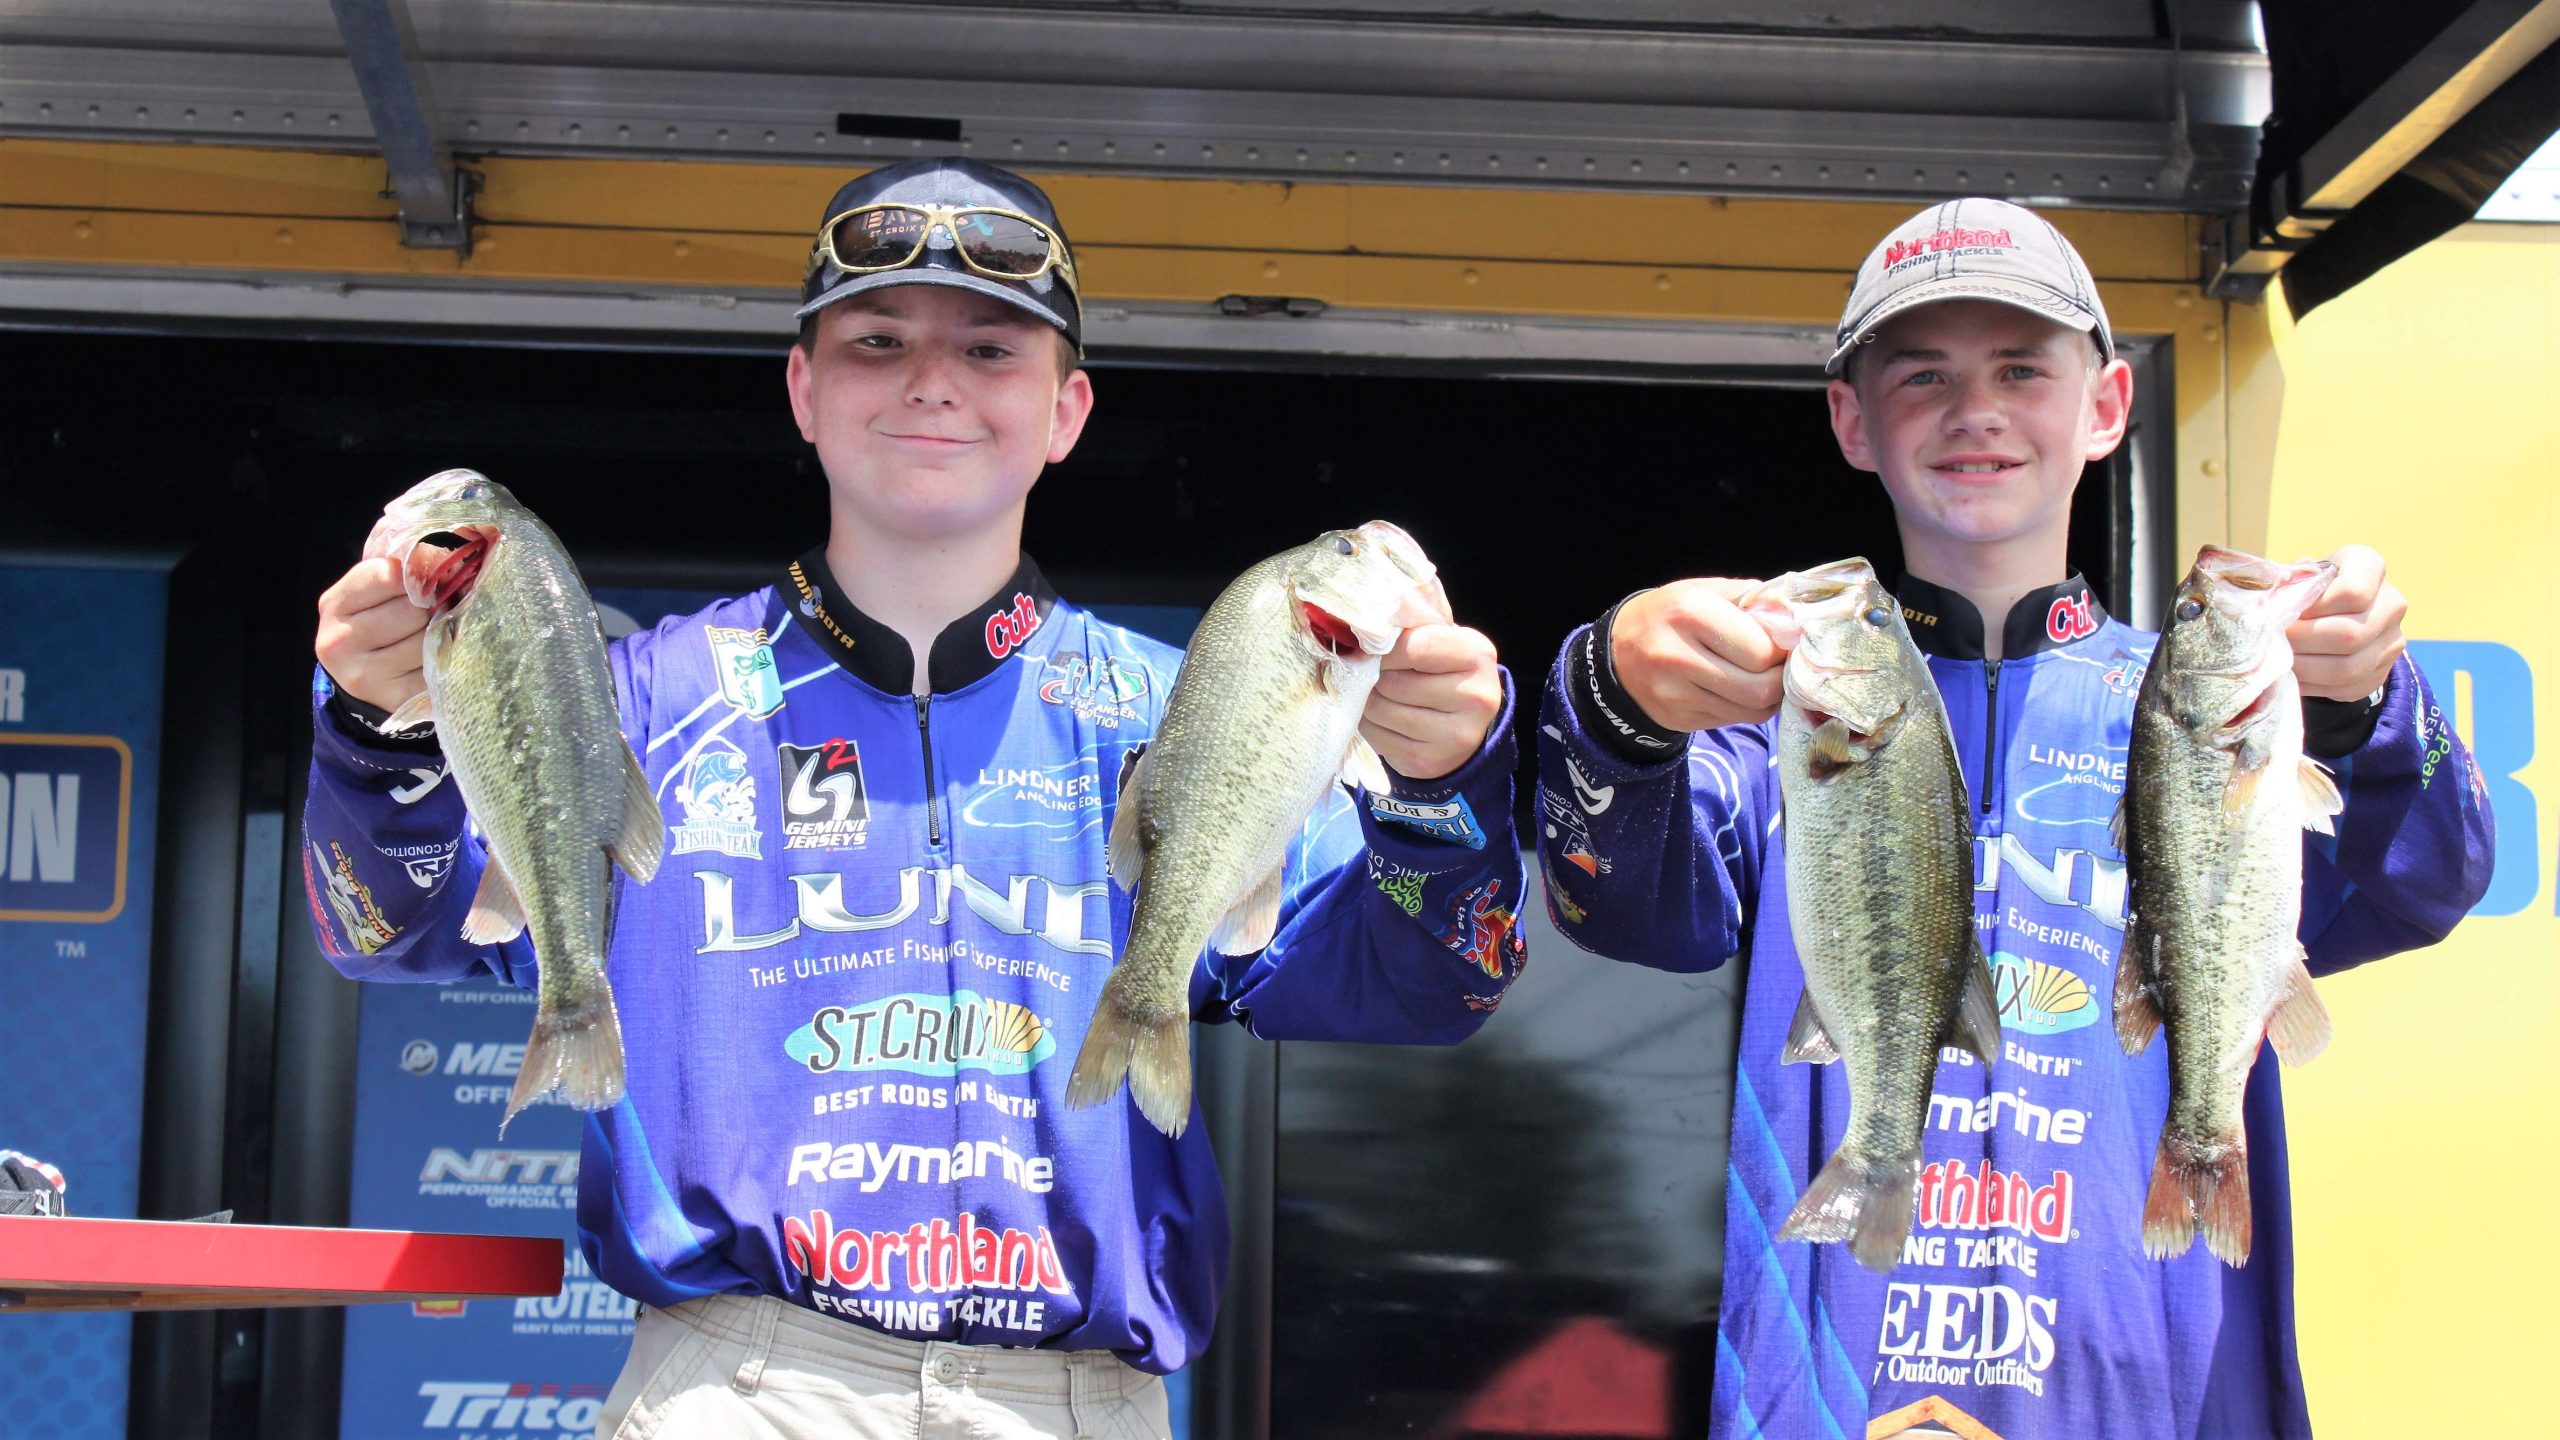 The Land of 10,000 Lakes was well represented on the âLake of 1,000 Acres.â Pictured are Minnesotaâs Tyler Bahr and Troy Peterson who finished 11th overall with 14-12.
